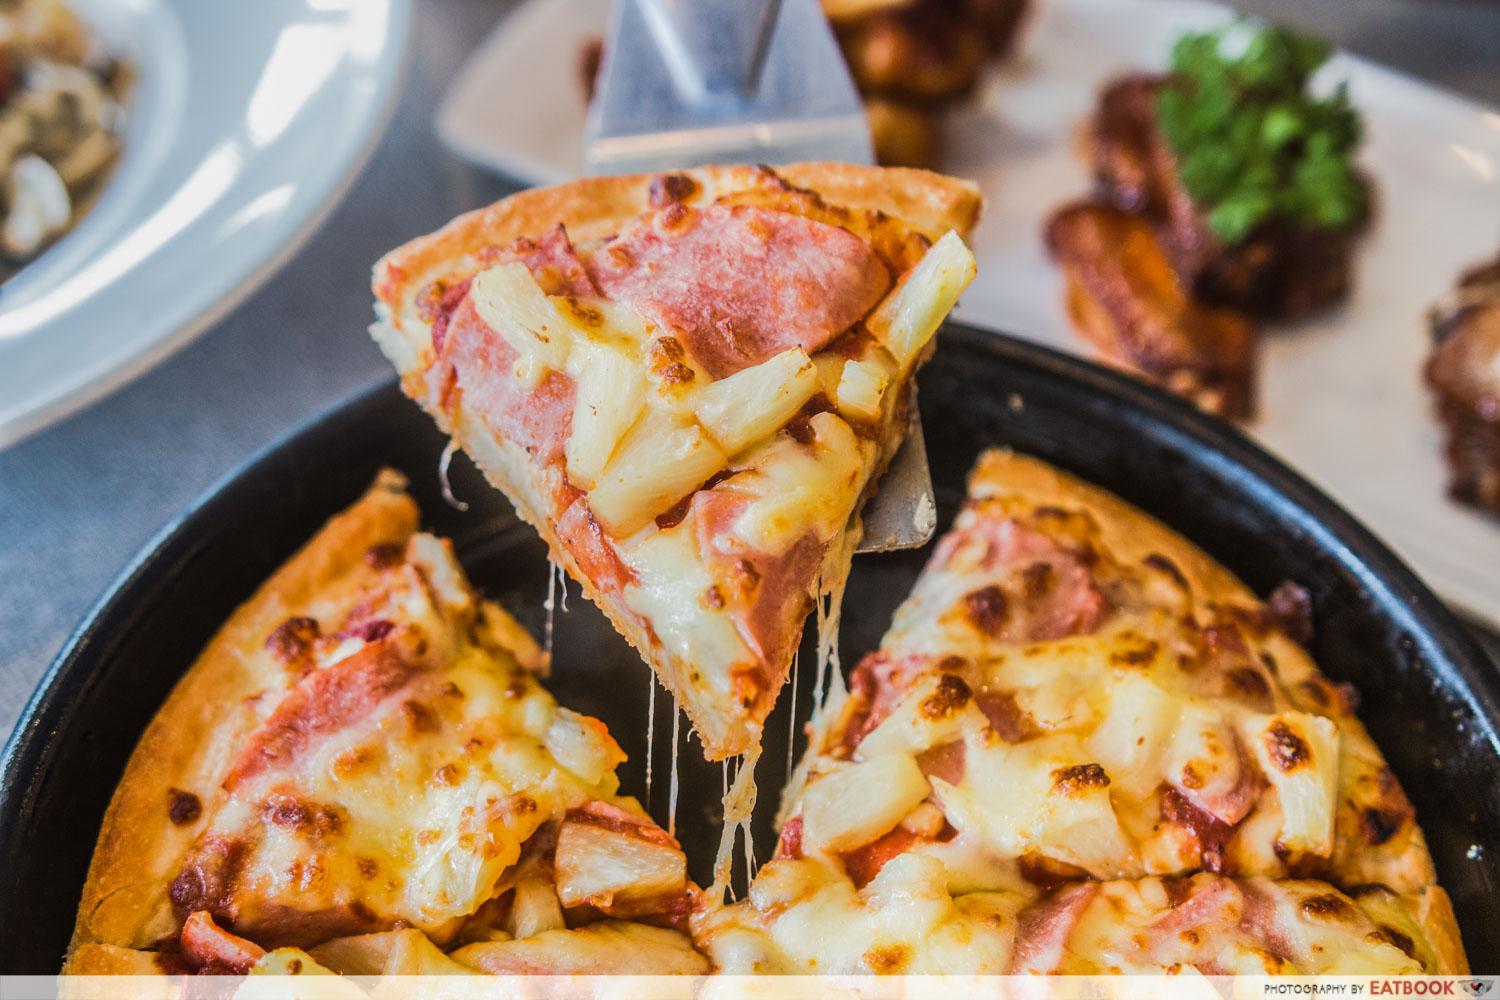 Get 1-For-1 Pizzas At Pizza Hut From $10 Every Tuesday - EatBook.sg